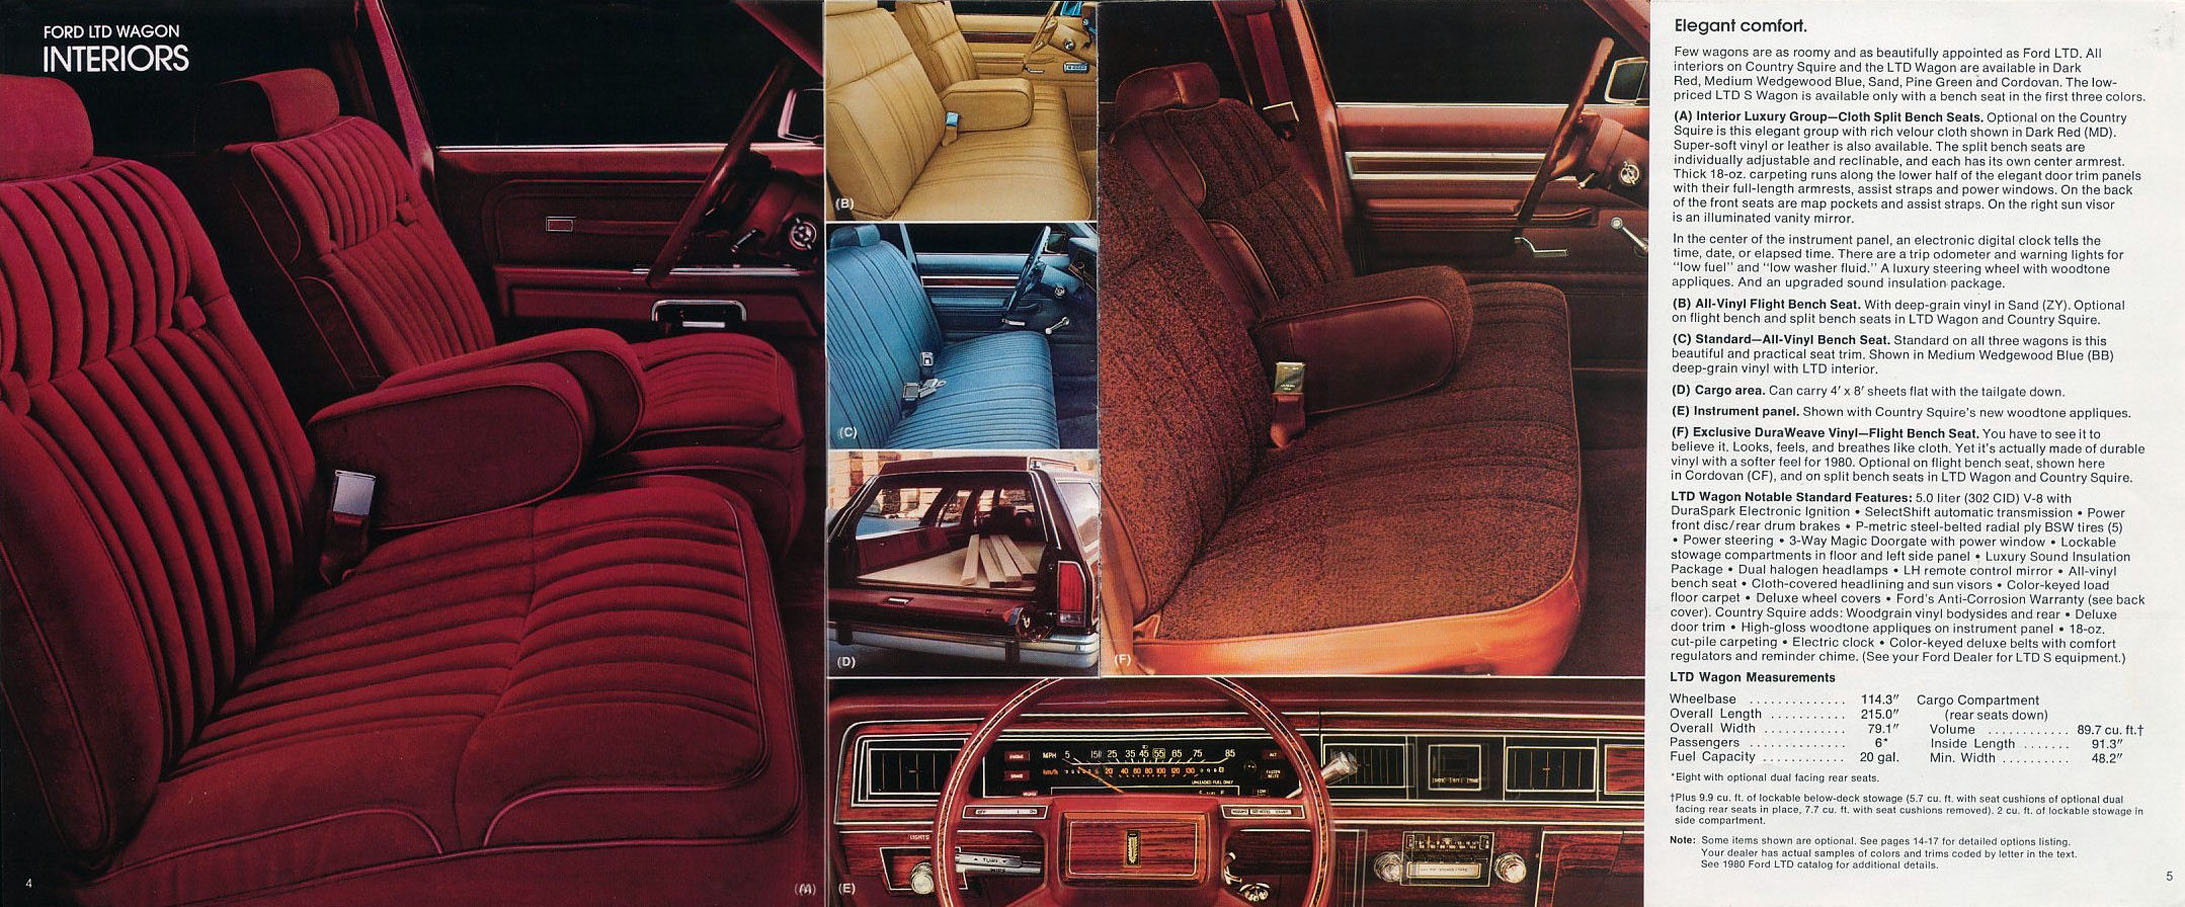 1980 Ford Wagons Brochure Page 7